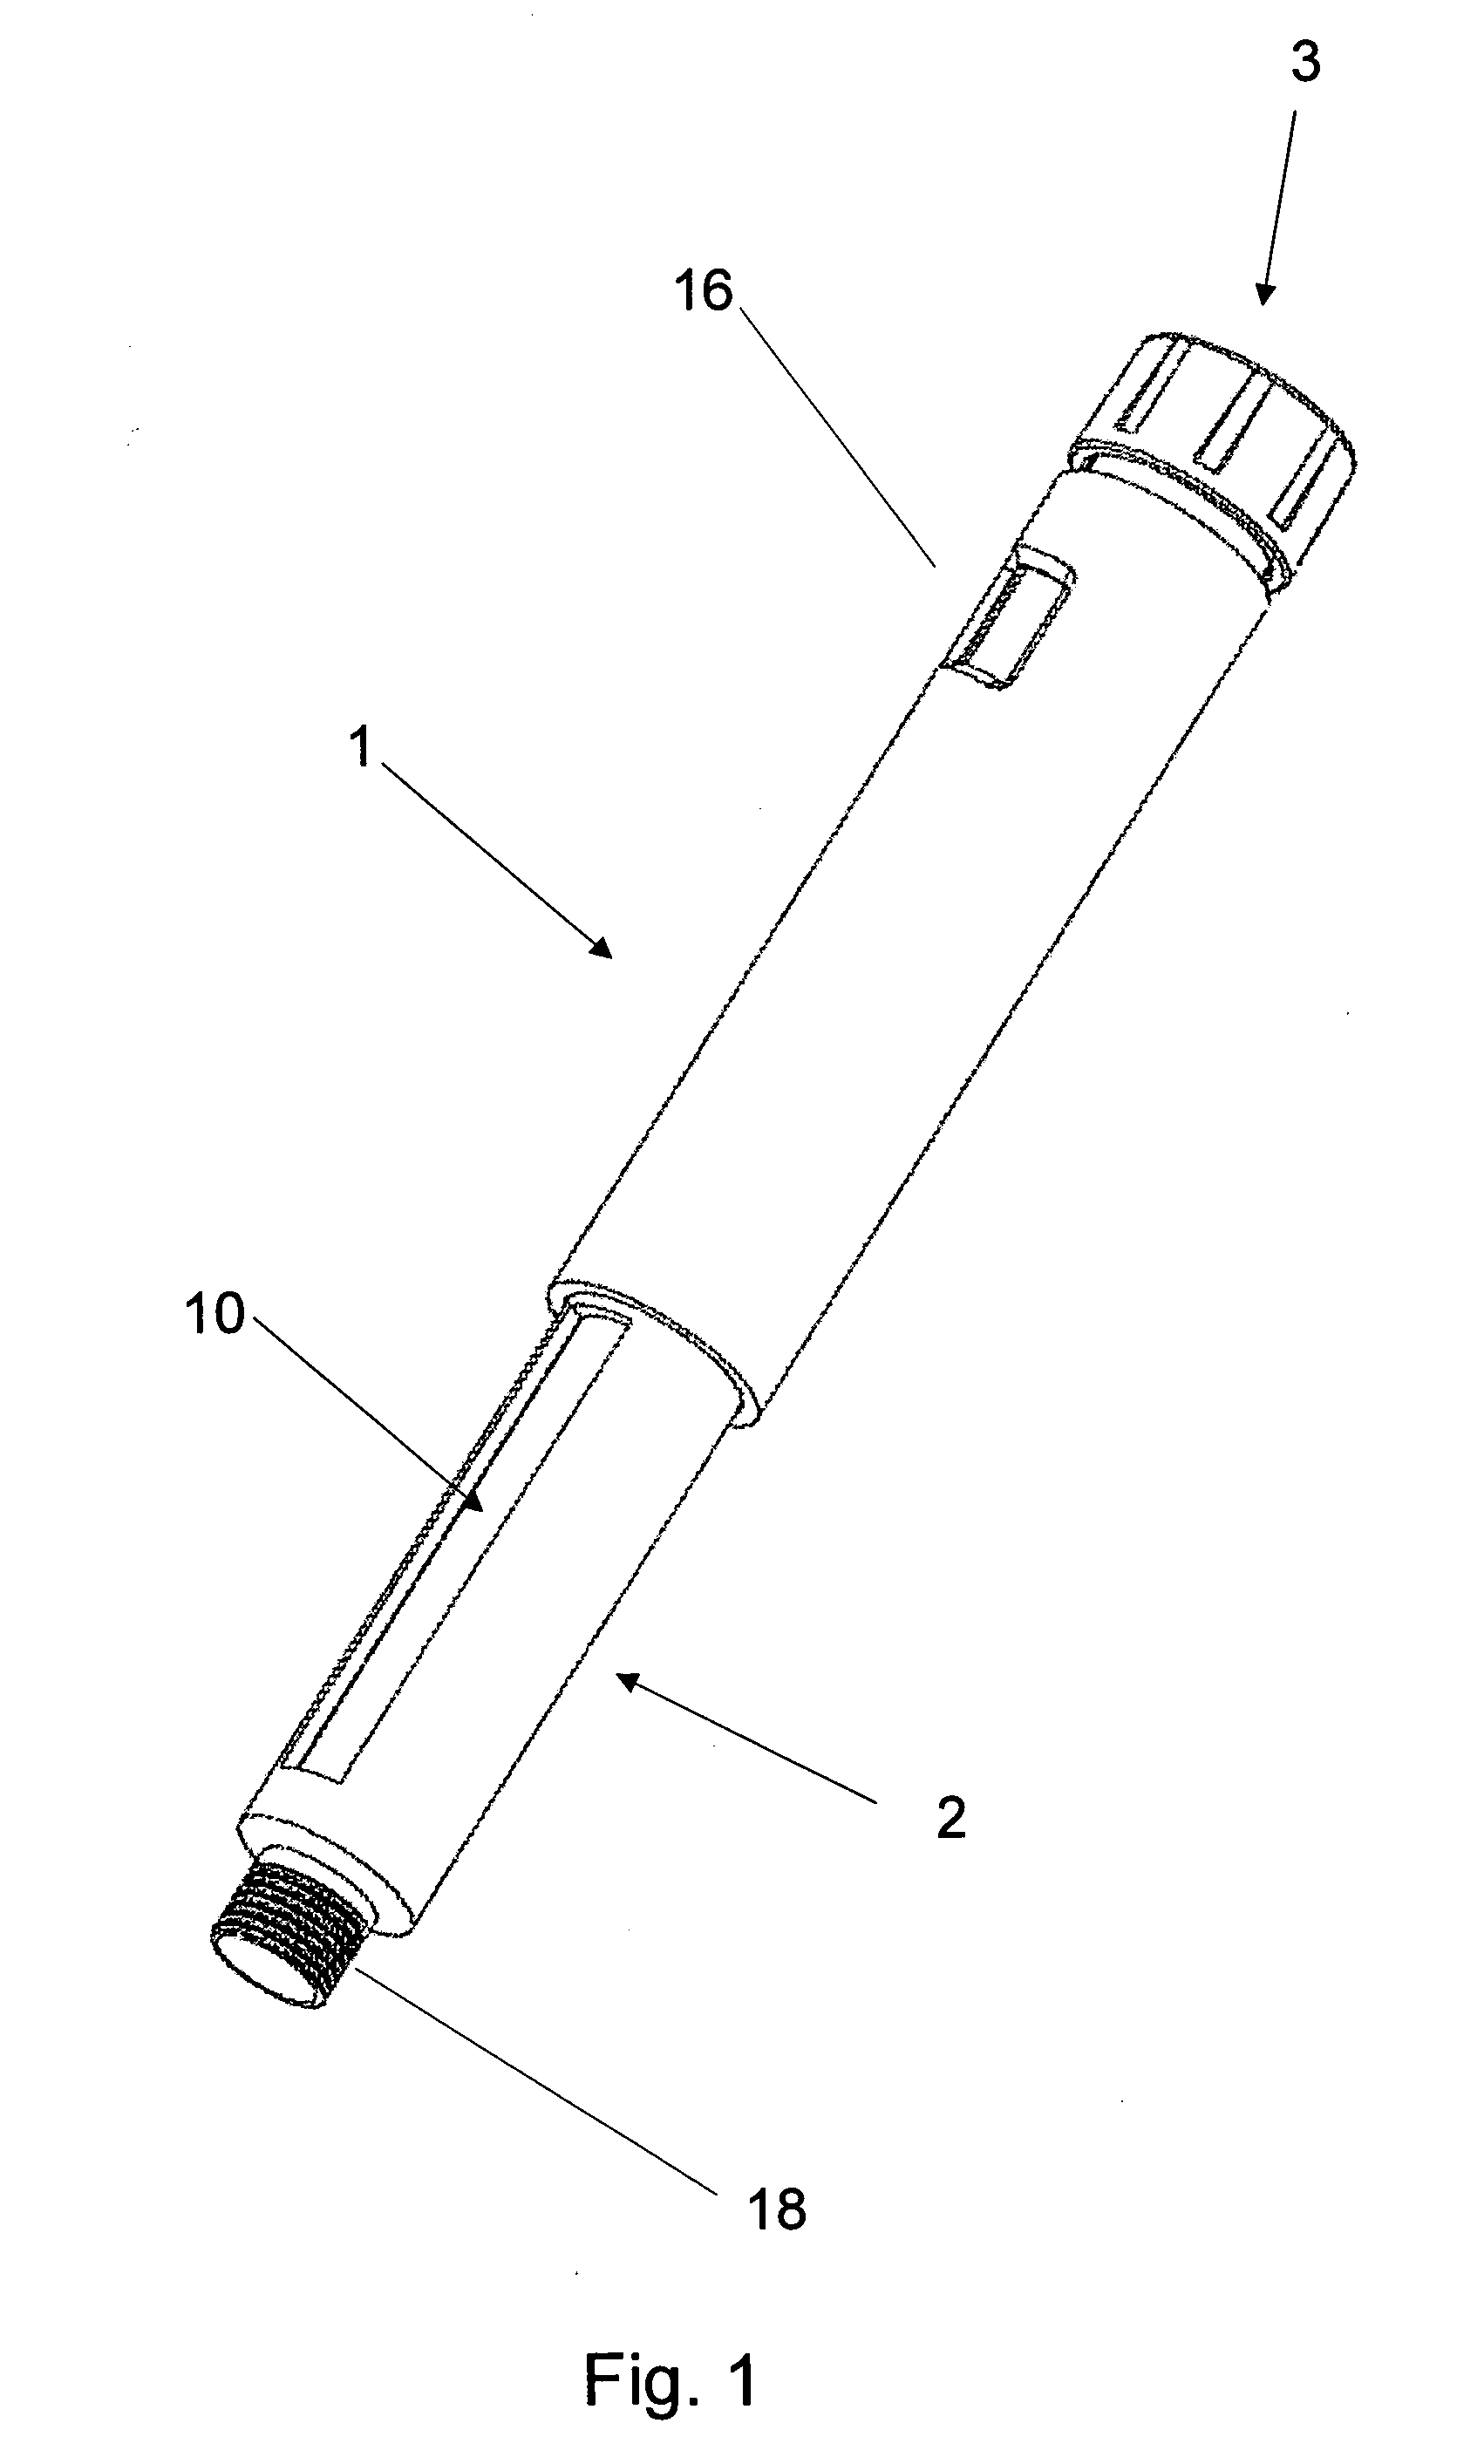 Dose delivery device with gearing mechanism